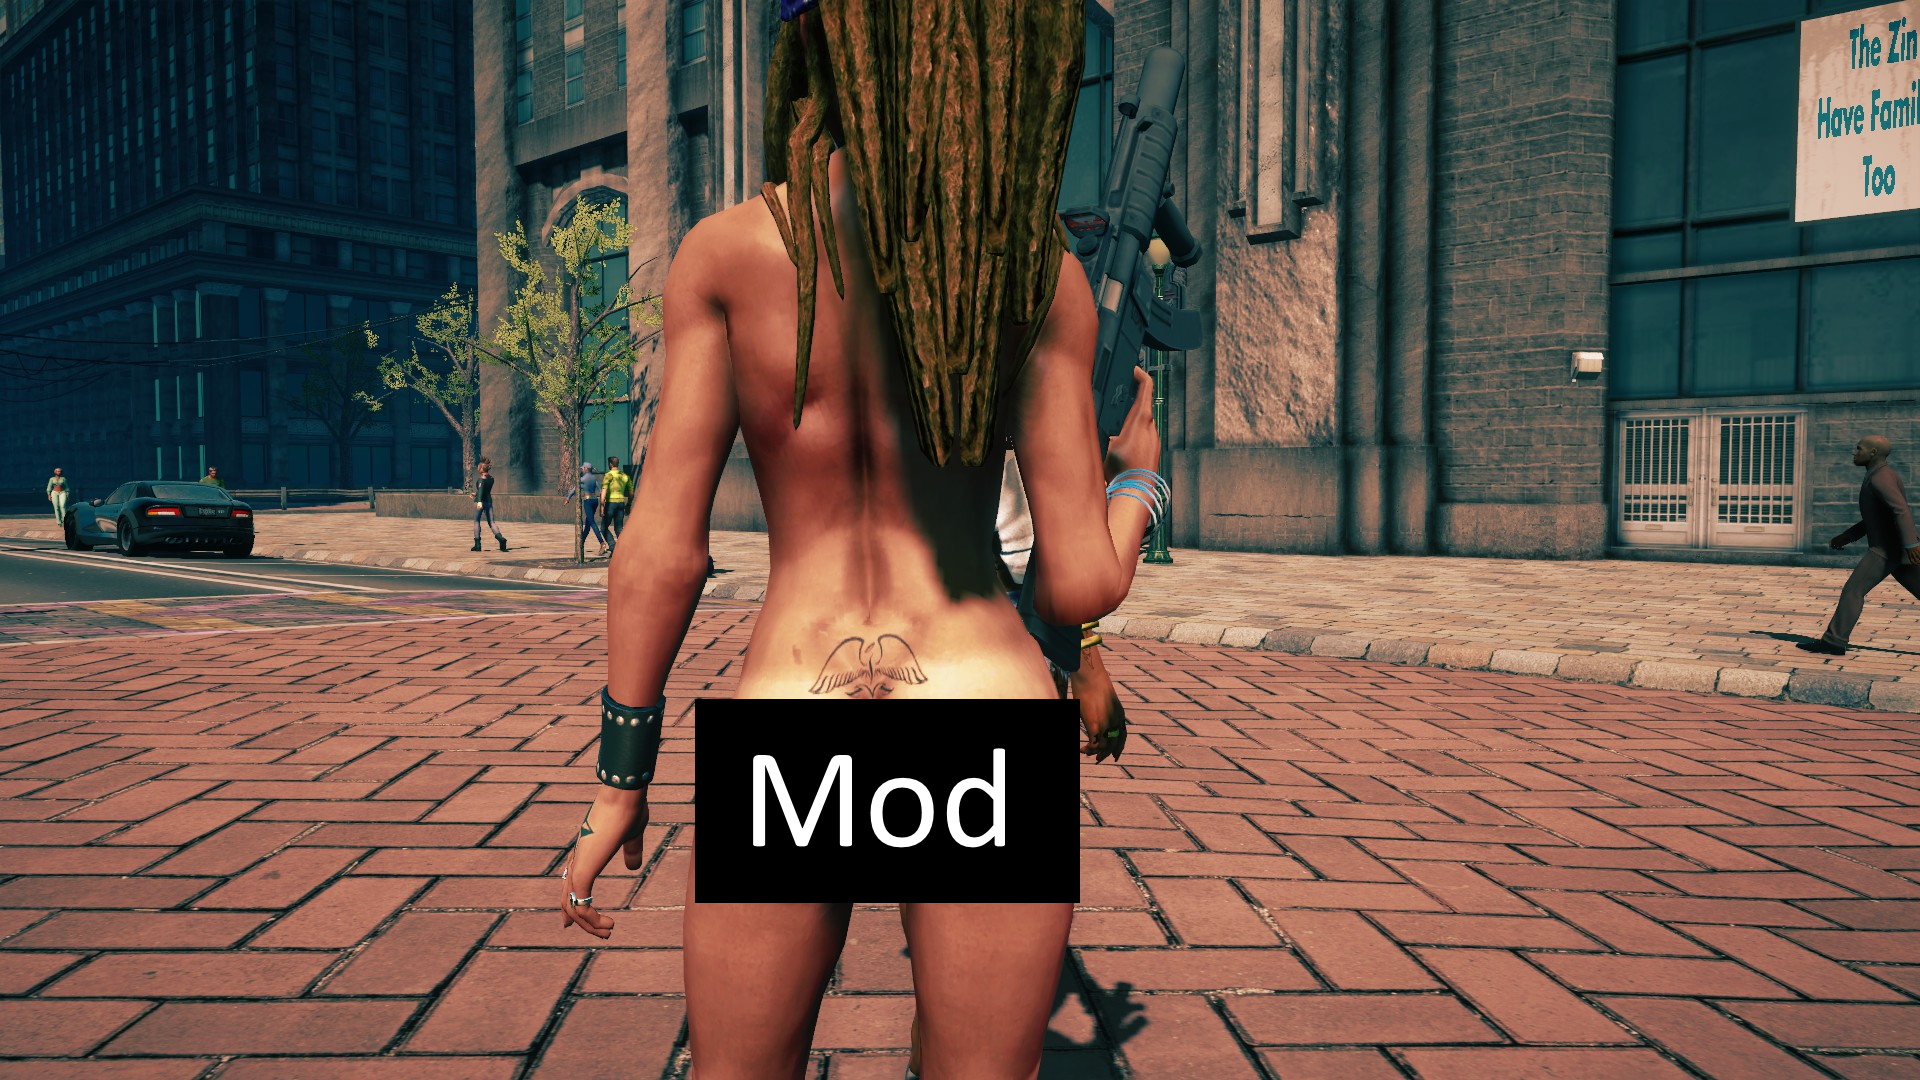 cosmas ng recommends Saints Row 4 Nudity Mod